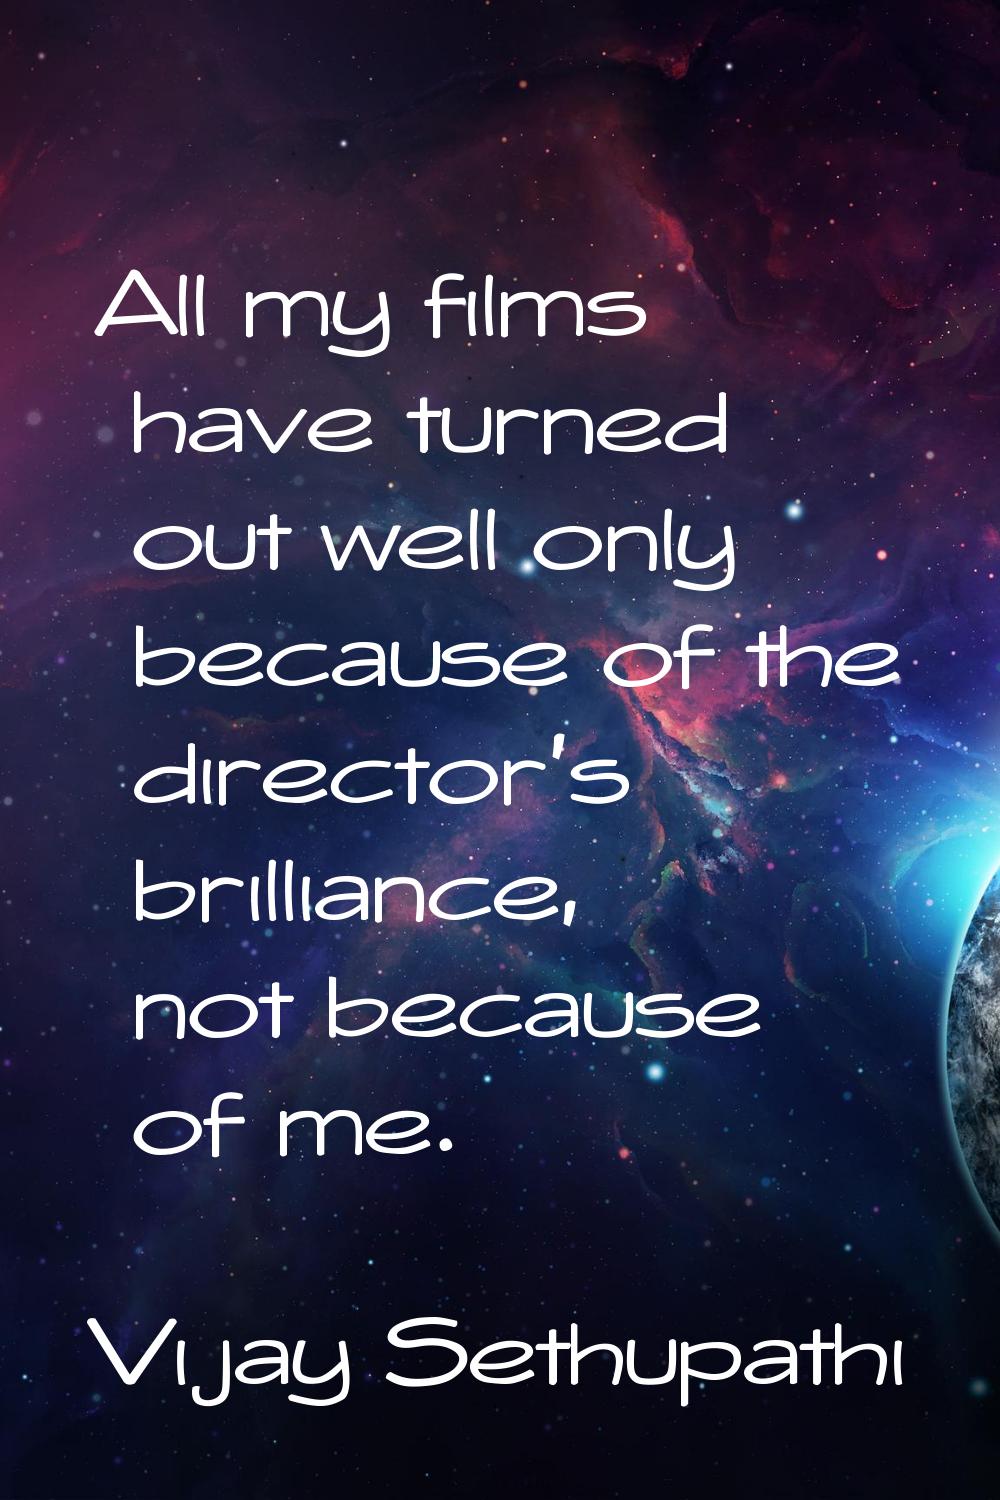 All my films have turned out well only because of the director's brilliance, not because of me.